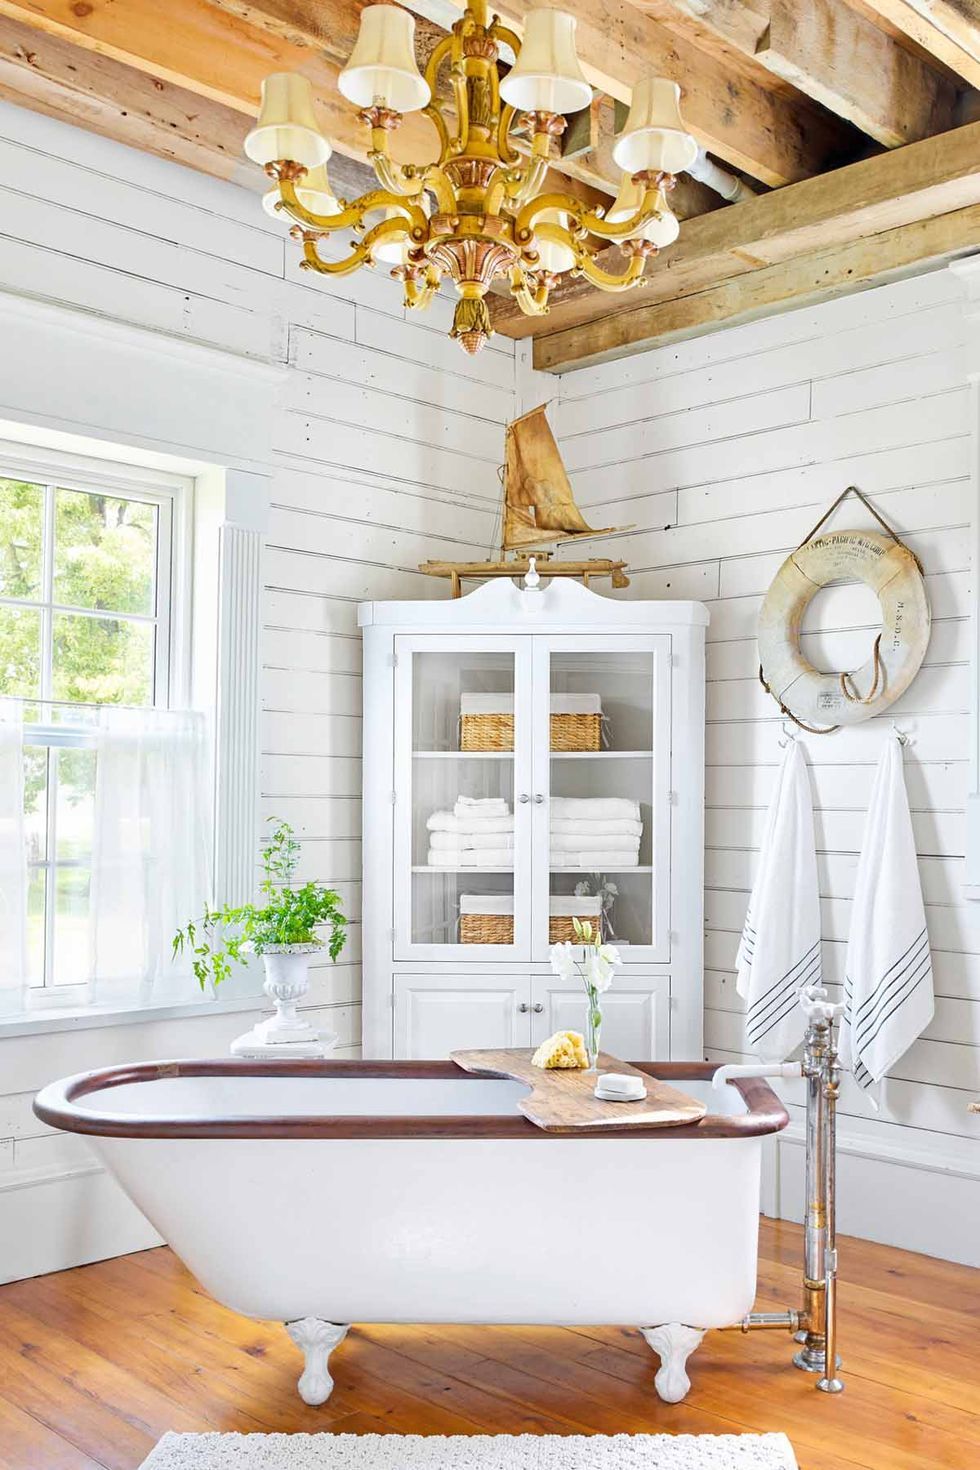 18 Timeless Rustic Bathroom Ideas   Pictures of Rustic Bathrooms